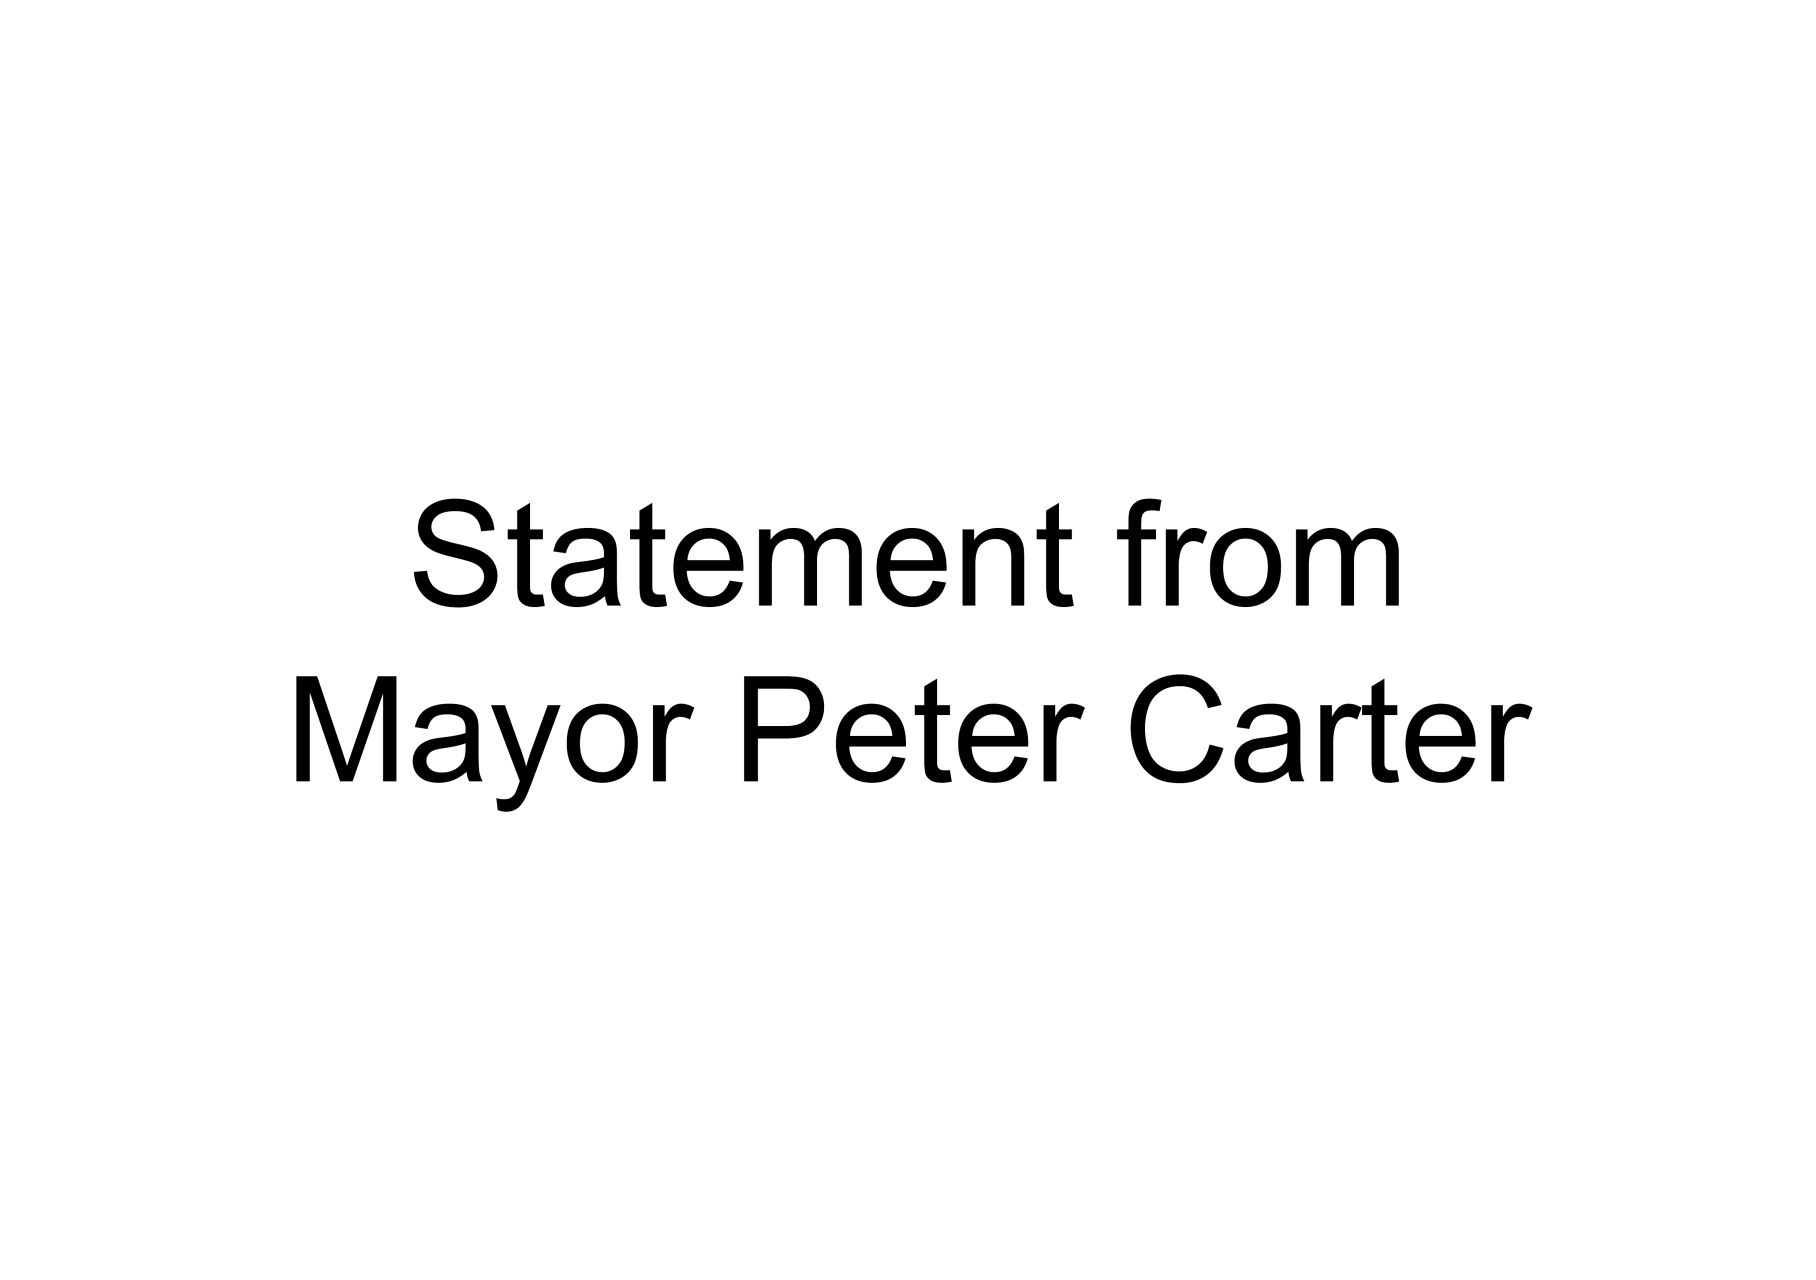 Statement from Mayor Peter Carter